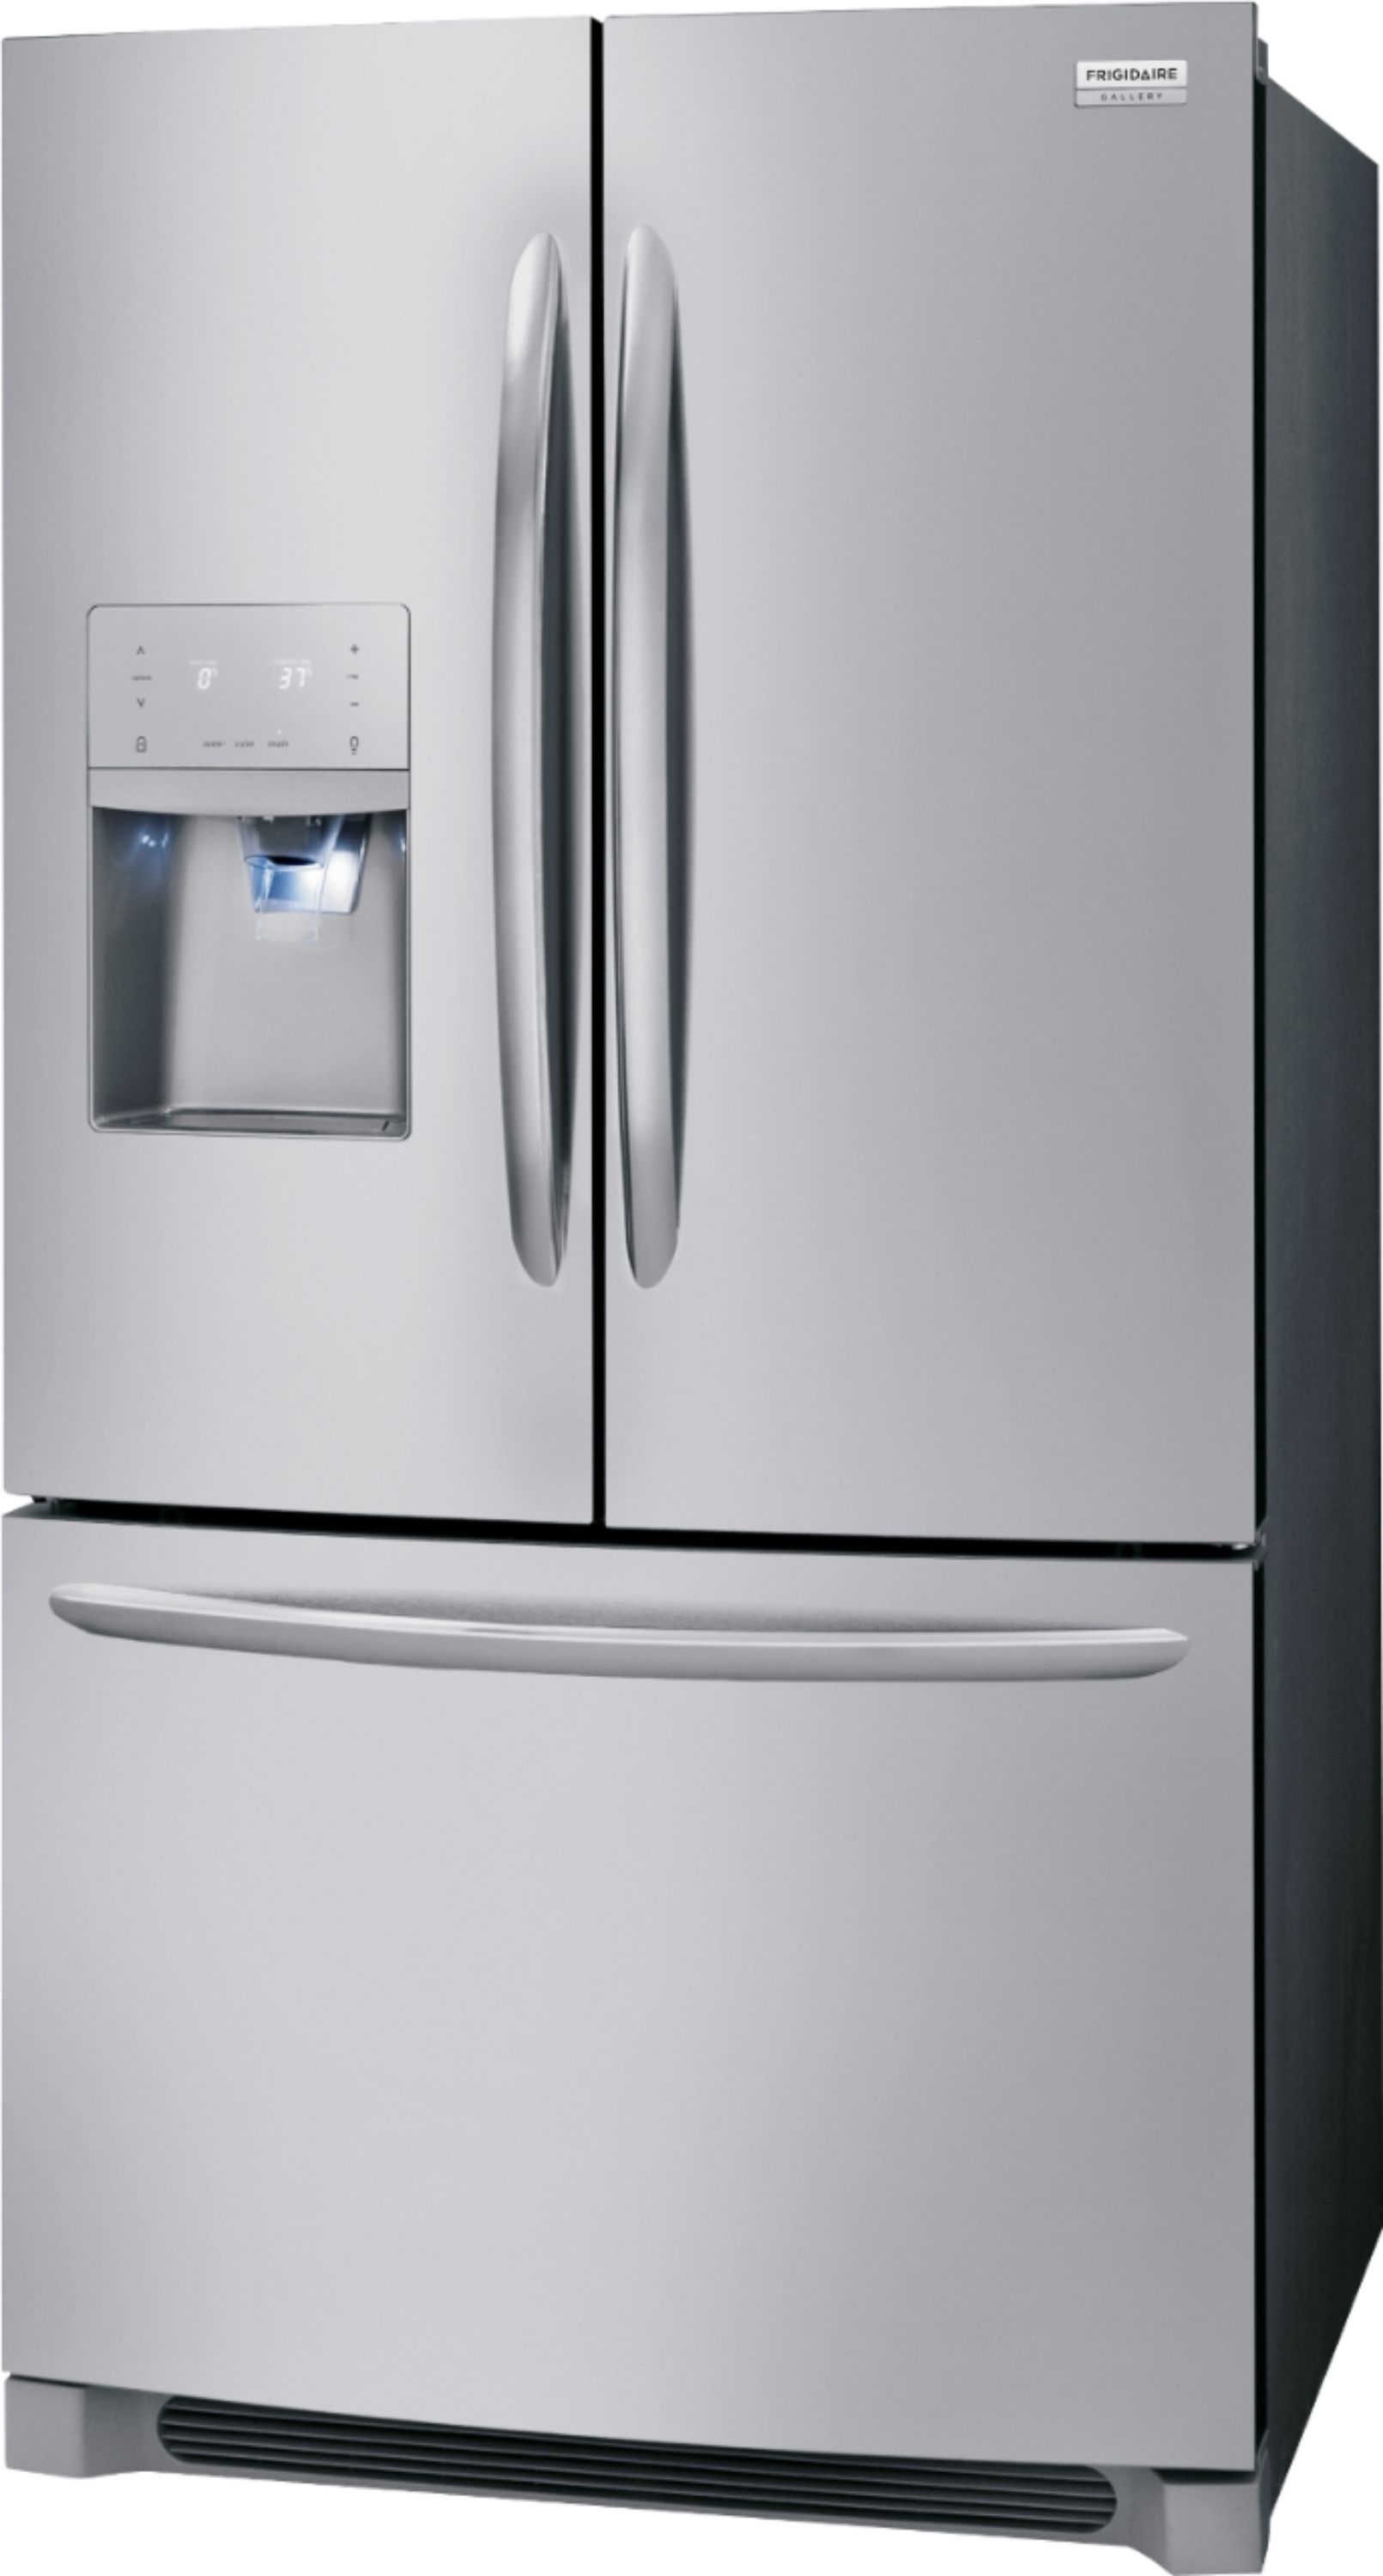 Frigidaire Gallery 26.8 Cu. Ft. French Door Refrigerator Stainless